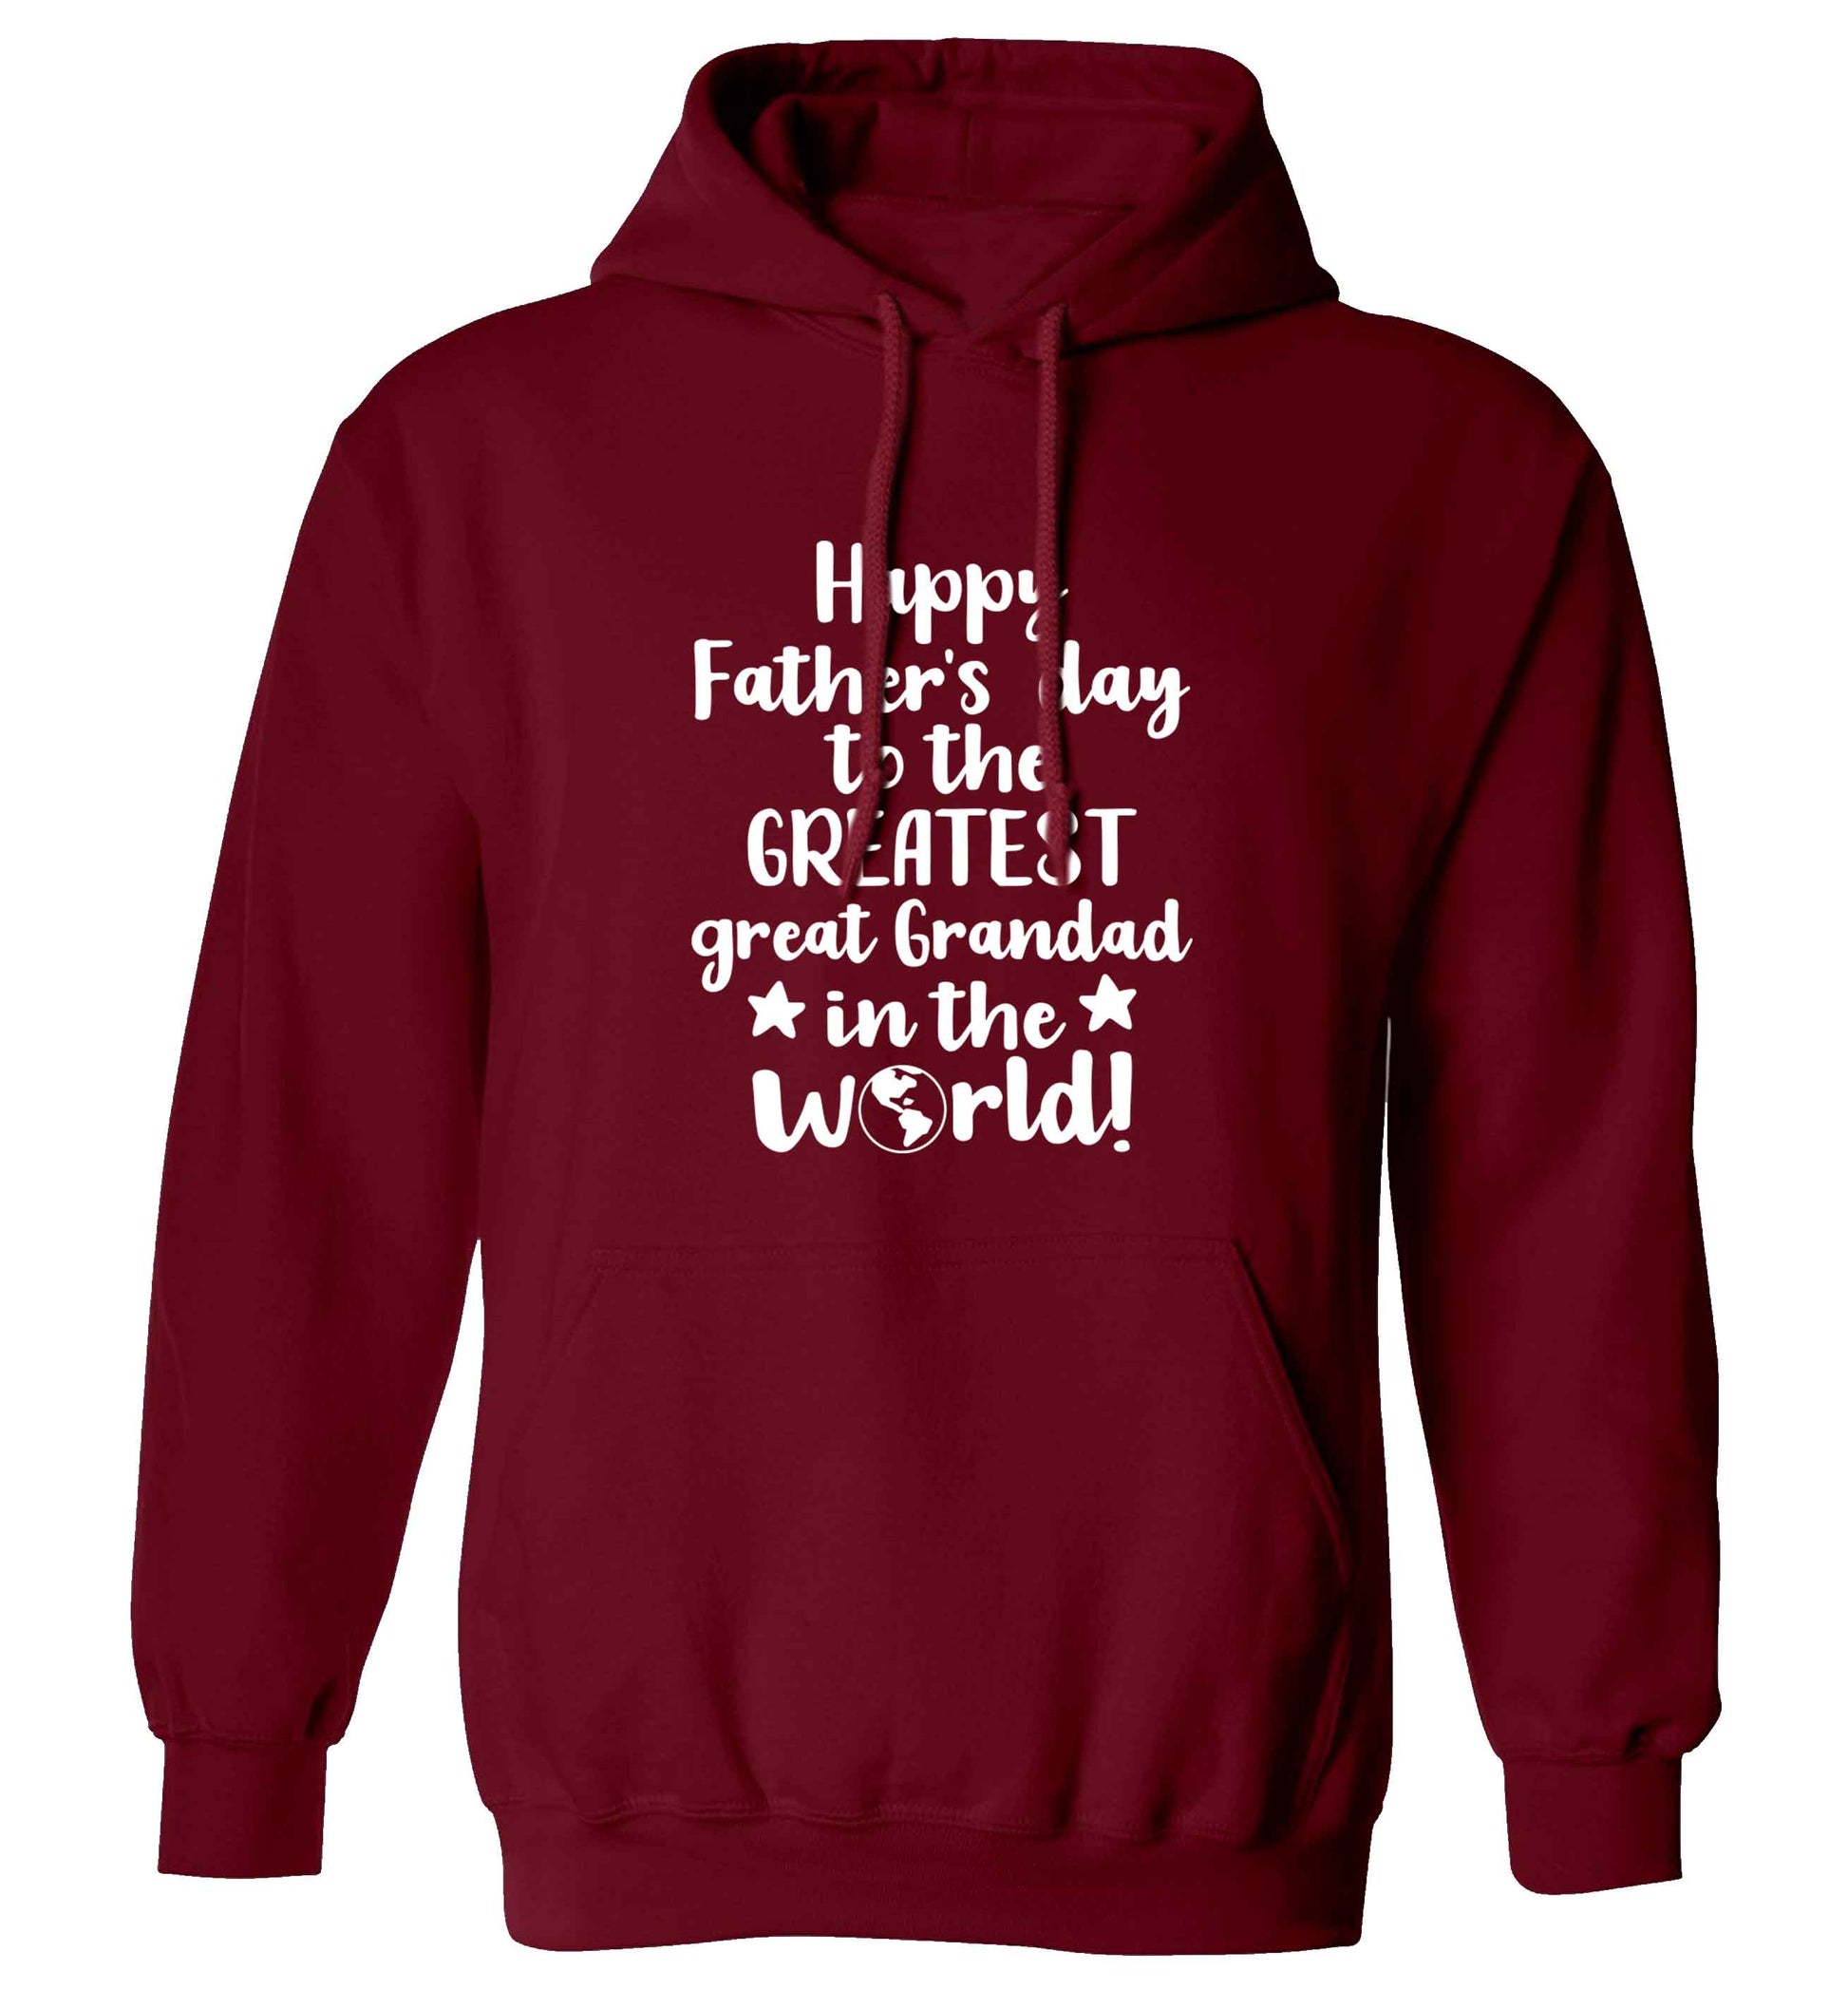 Happy Father's day to the greatest great grandad in the world adults unisex maroon hoodie 2XL